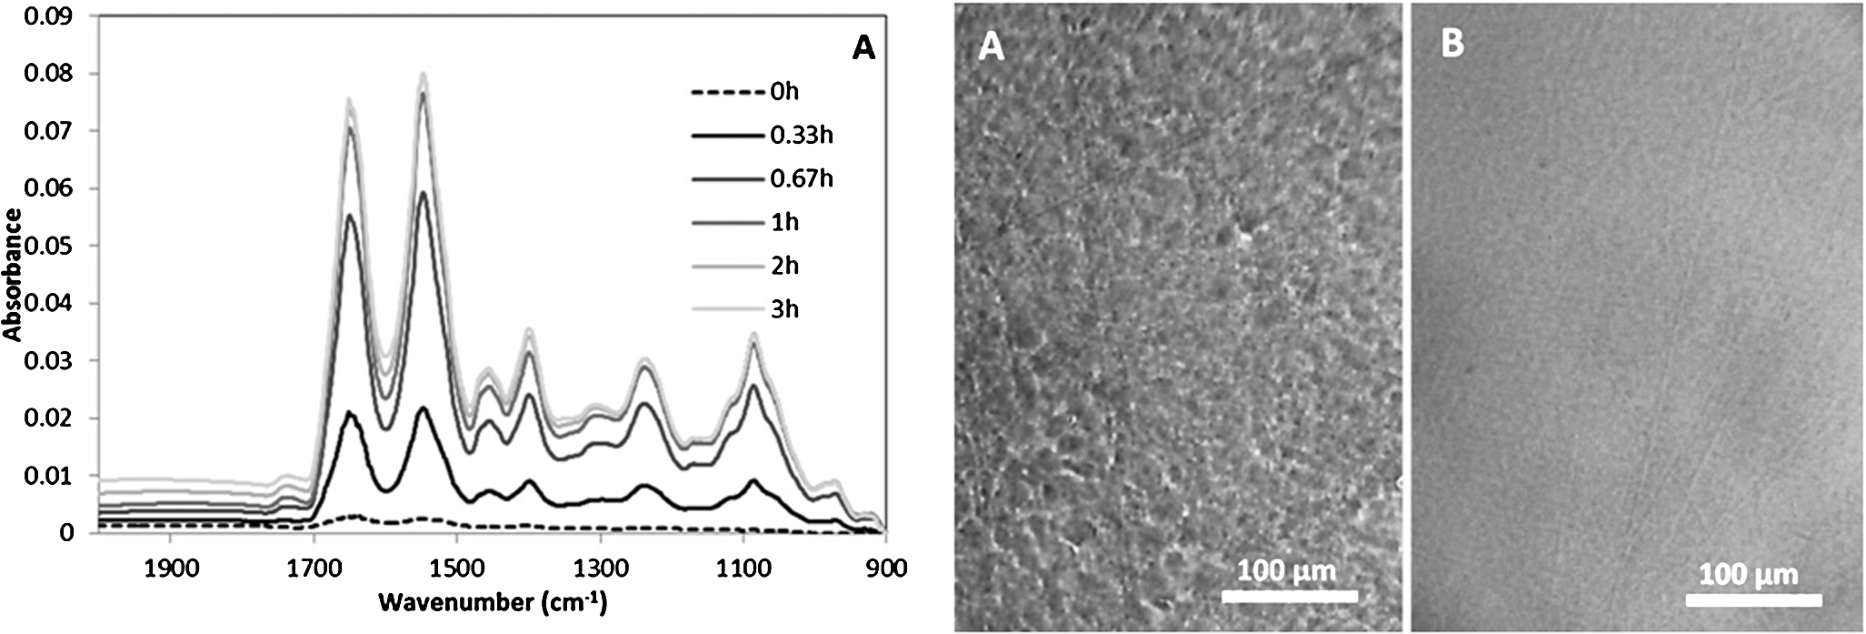 (a) FTIR absorbance spectra of cells in the first three hours after seeding in the ATR element. (b) Reflective visible images of a germanium ATR crystal surface, showing a roughness where the cells were attached to the crystal (left) and a smooth surface in the area not exposed in the cell culture (right) [this figure was originally published in [19]].